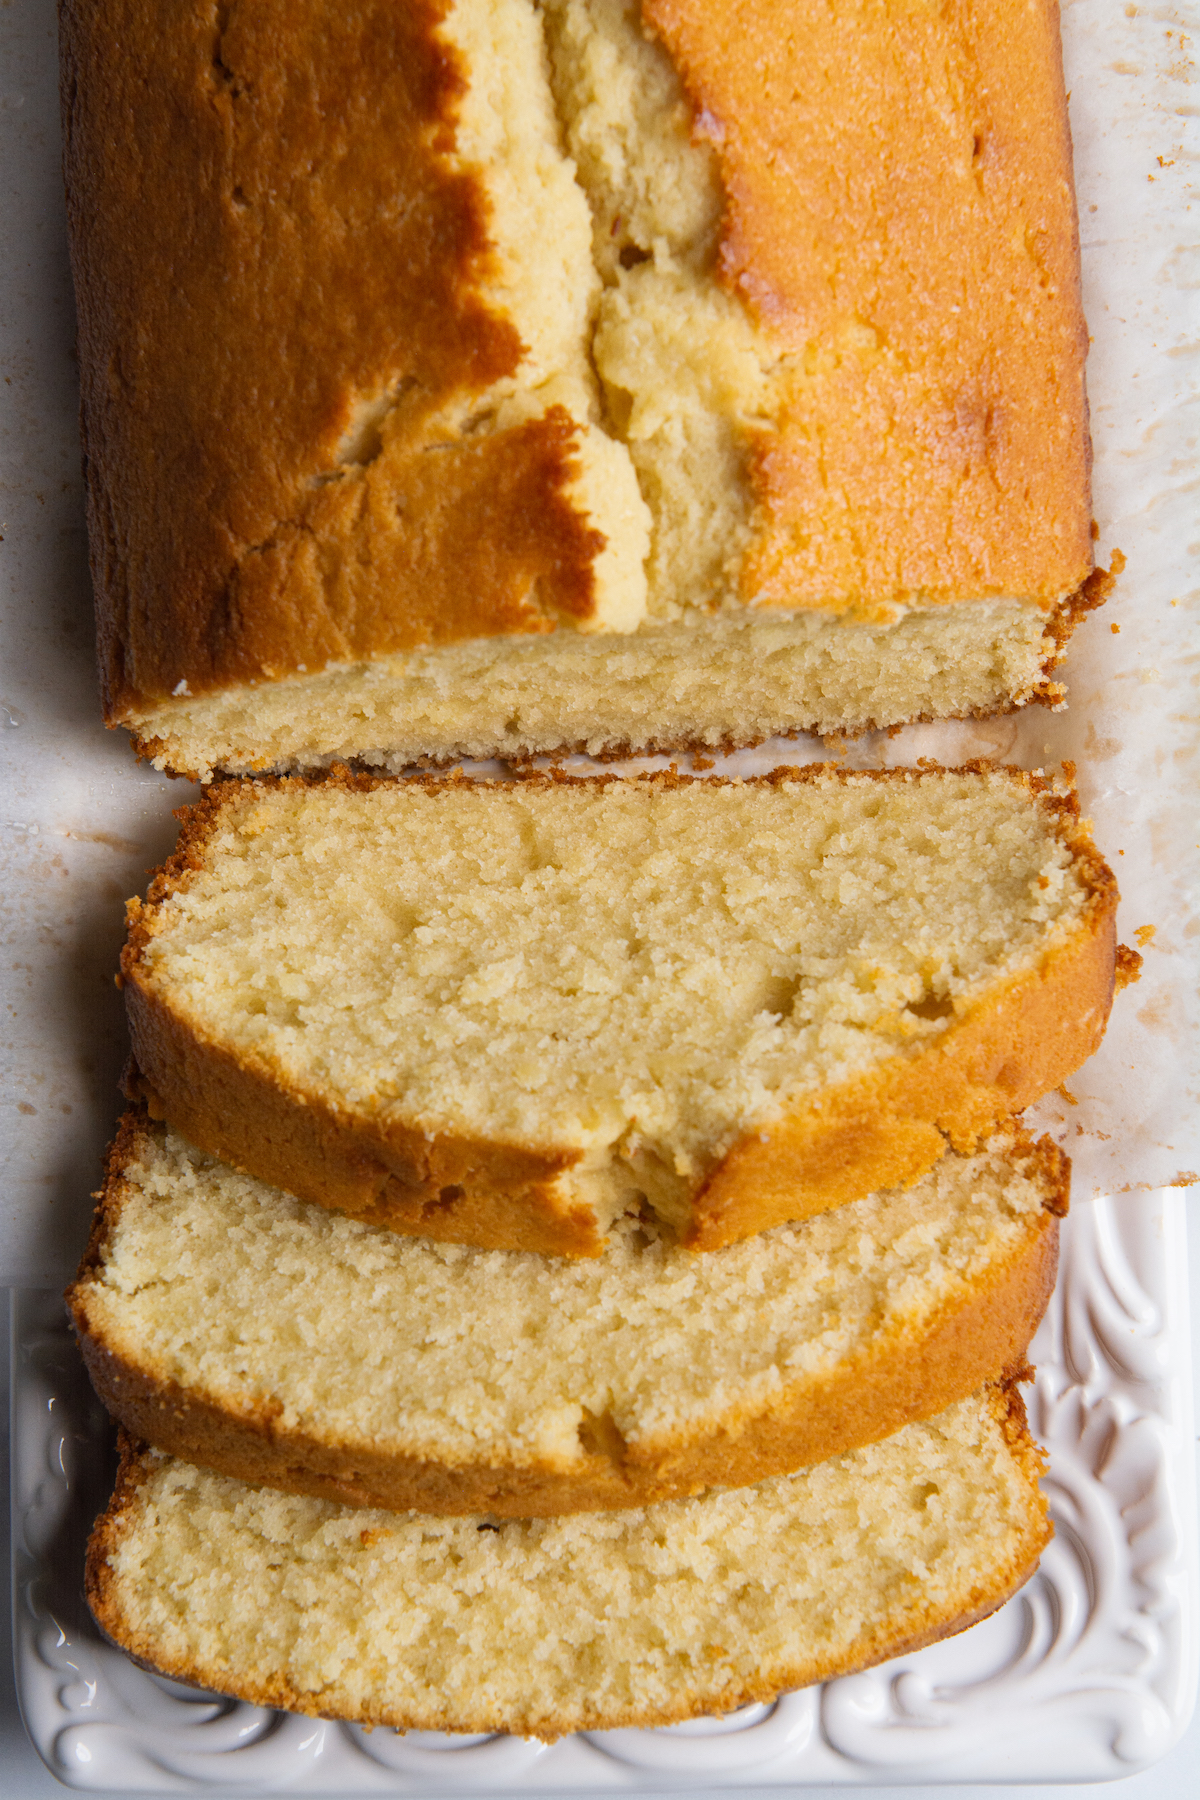 A loaf of pound cake cut into three slices on a serving platter.